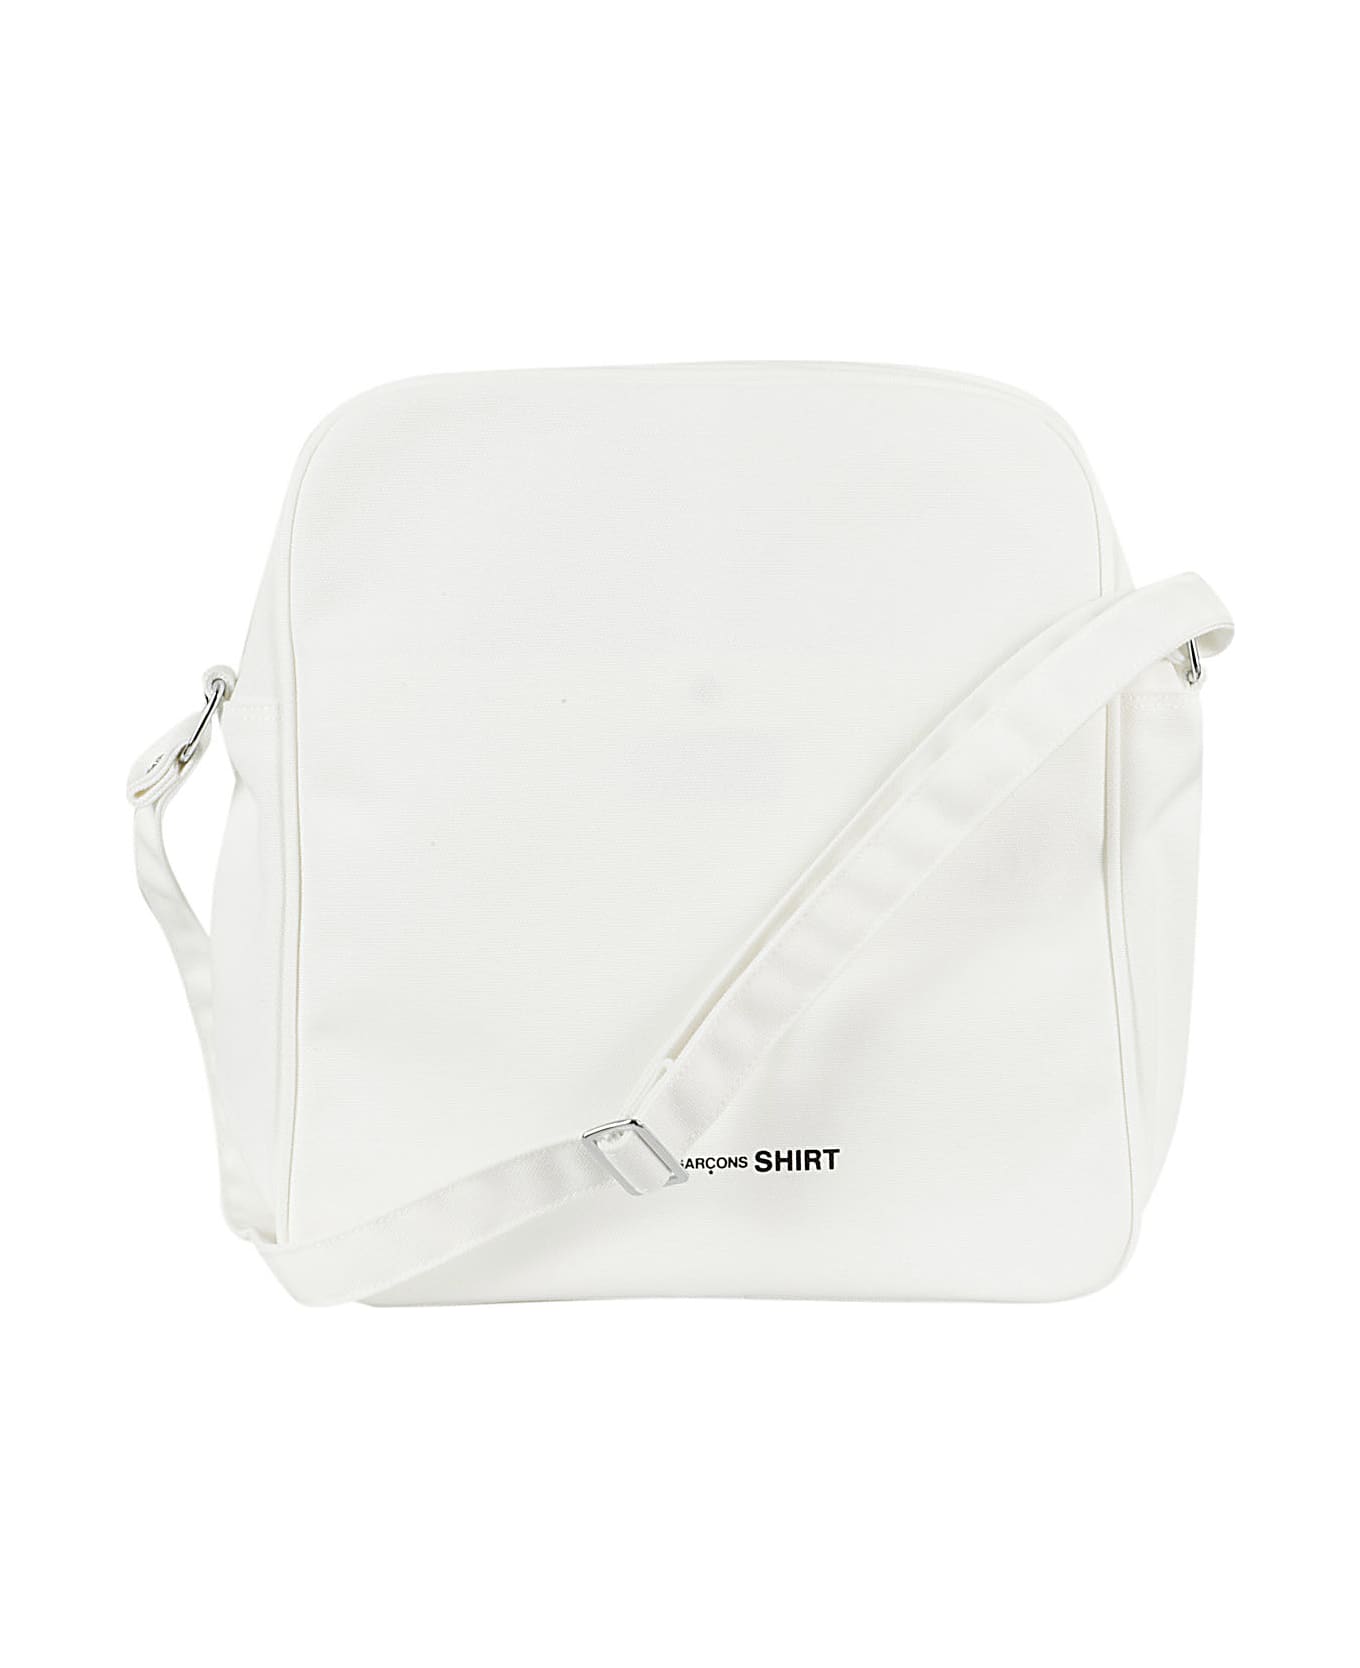 Comme des Garçons Shirt Bags Synthetic - White ショルダーバッグ